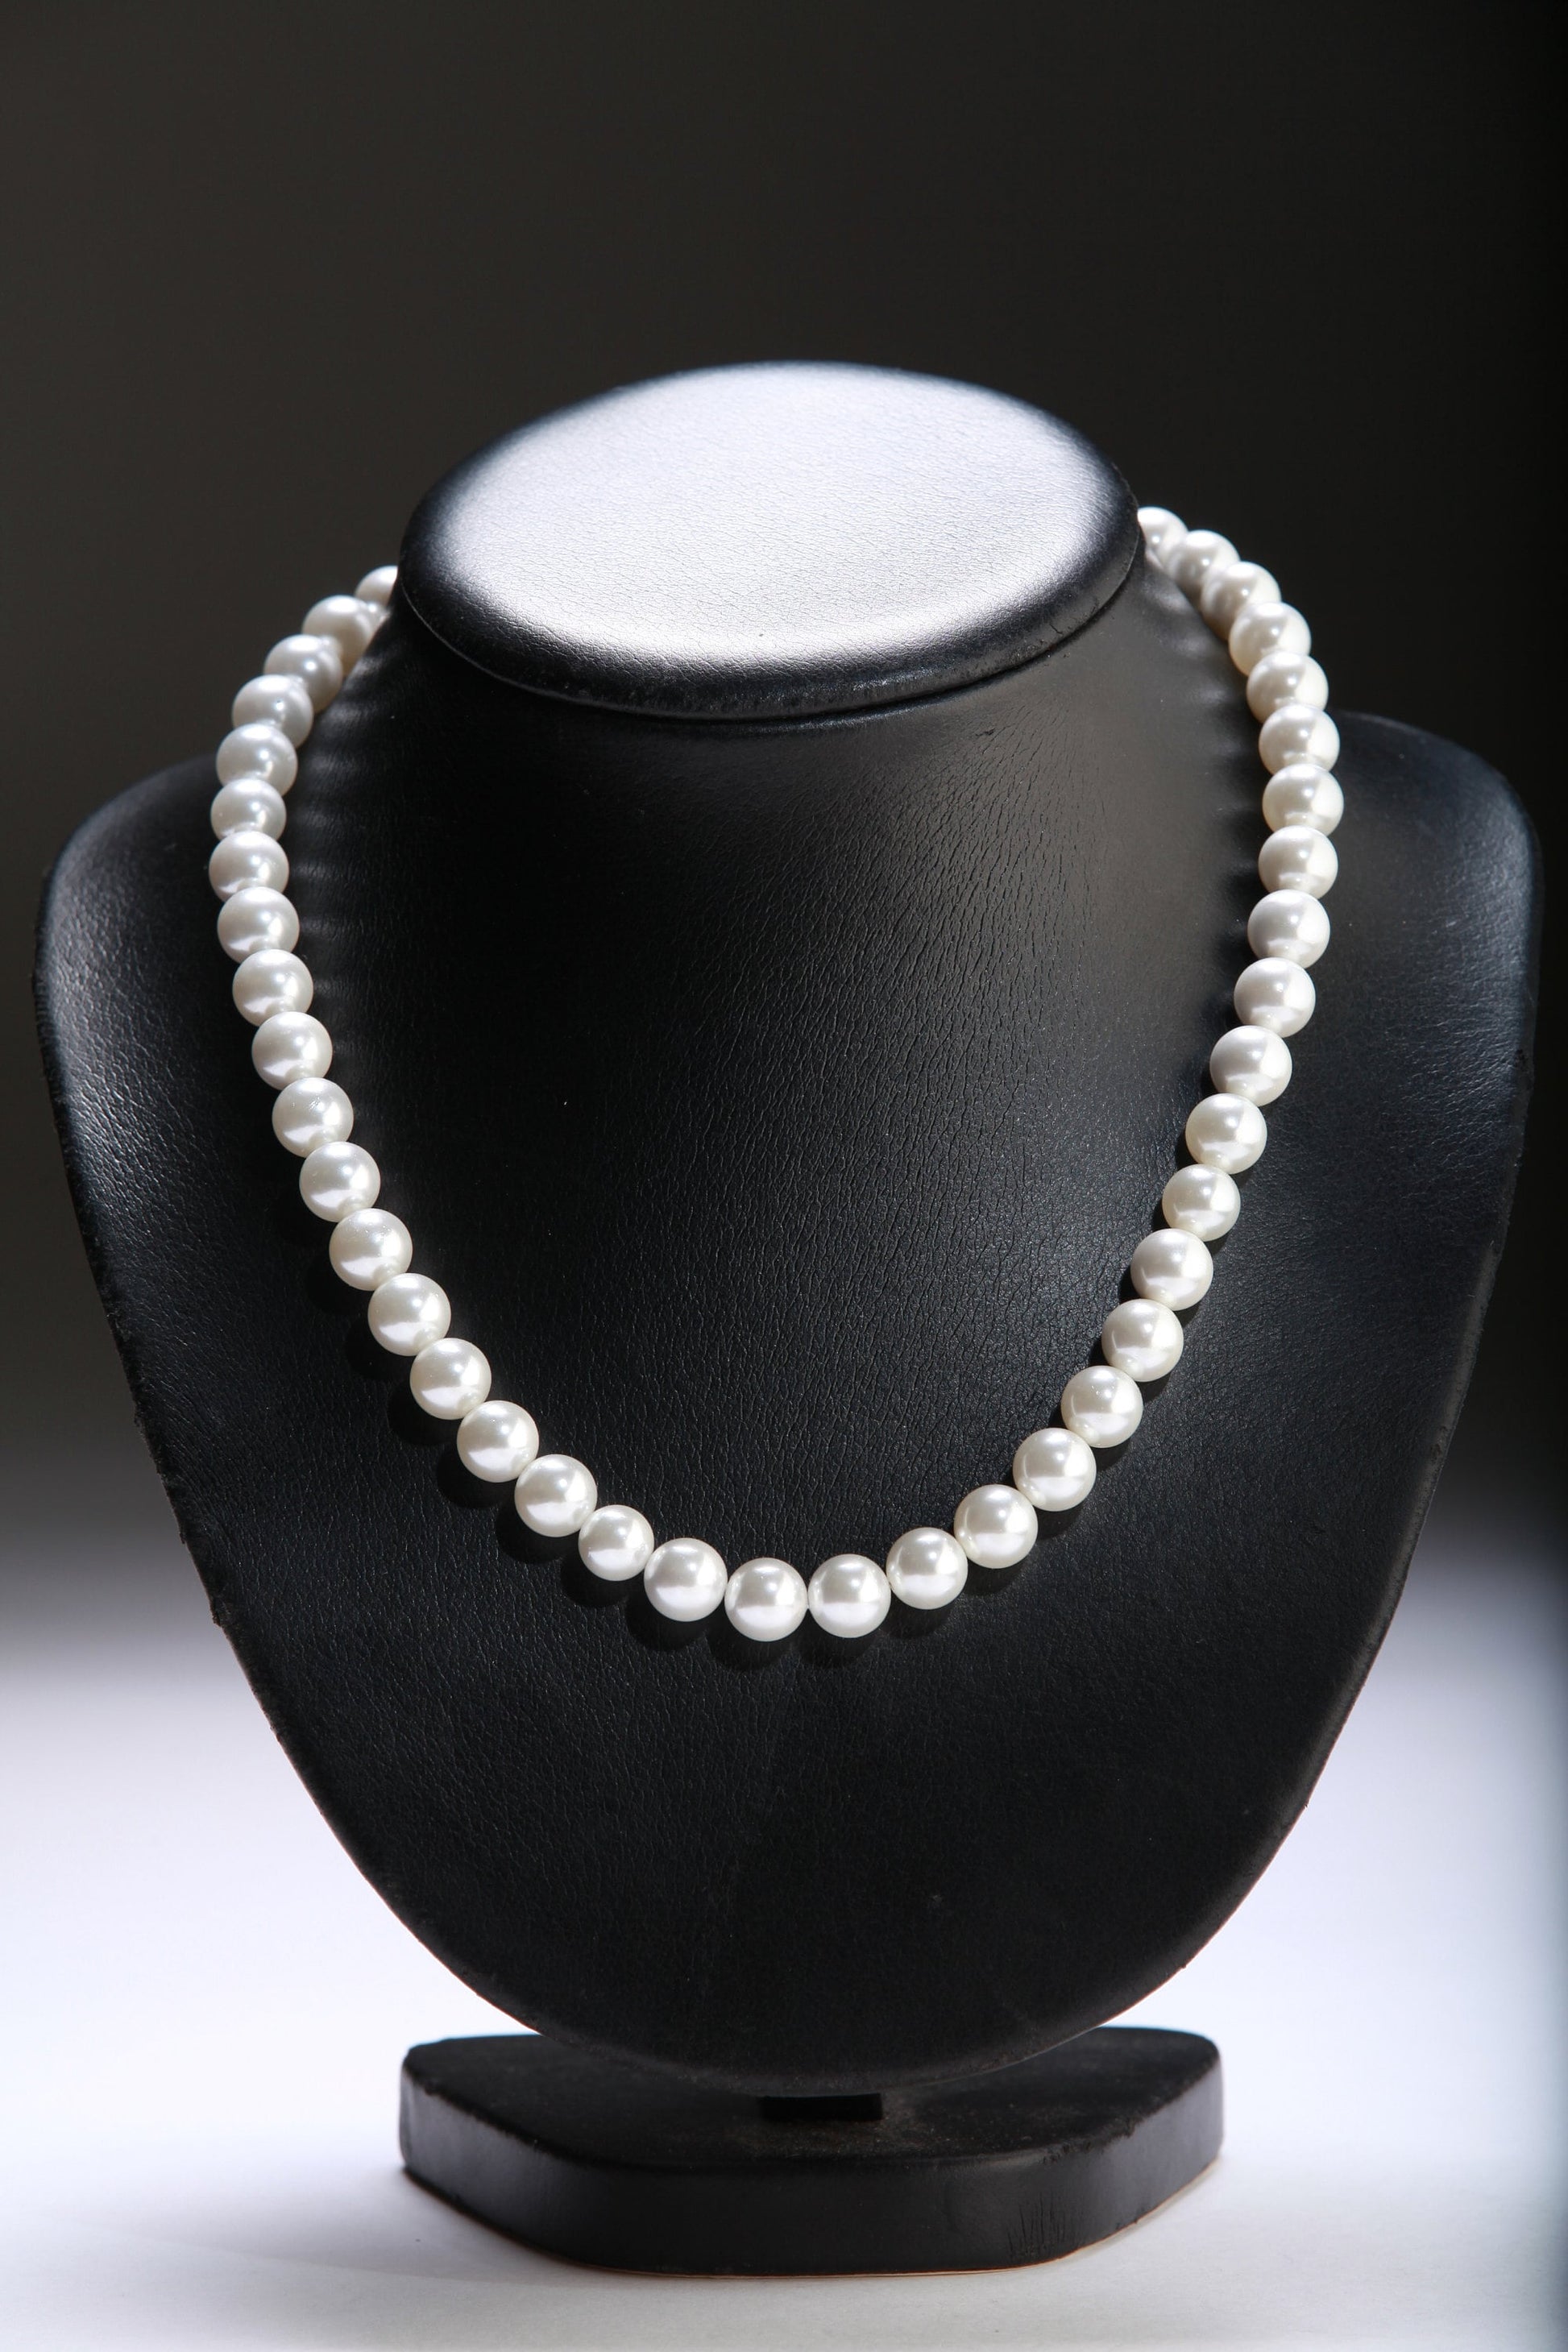 Pearl Necklace, White South Seashell Pearl 8mm,10mm Round Statement Necklace with Strong Magnetic Ball Clasp 16"- 40" Bridal, Gift for Her